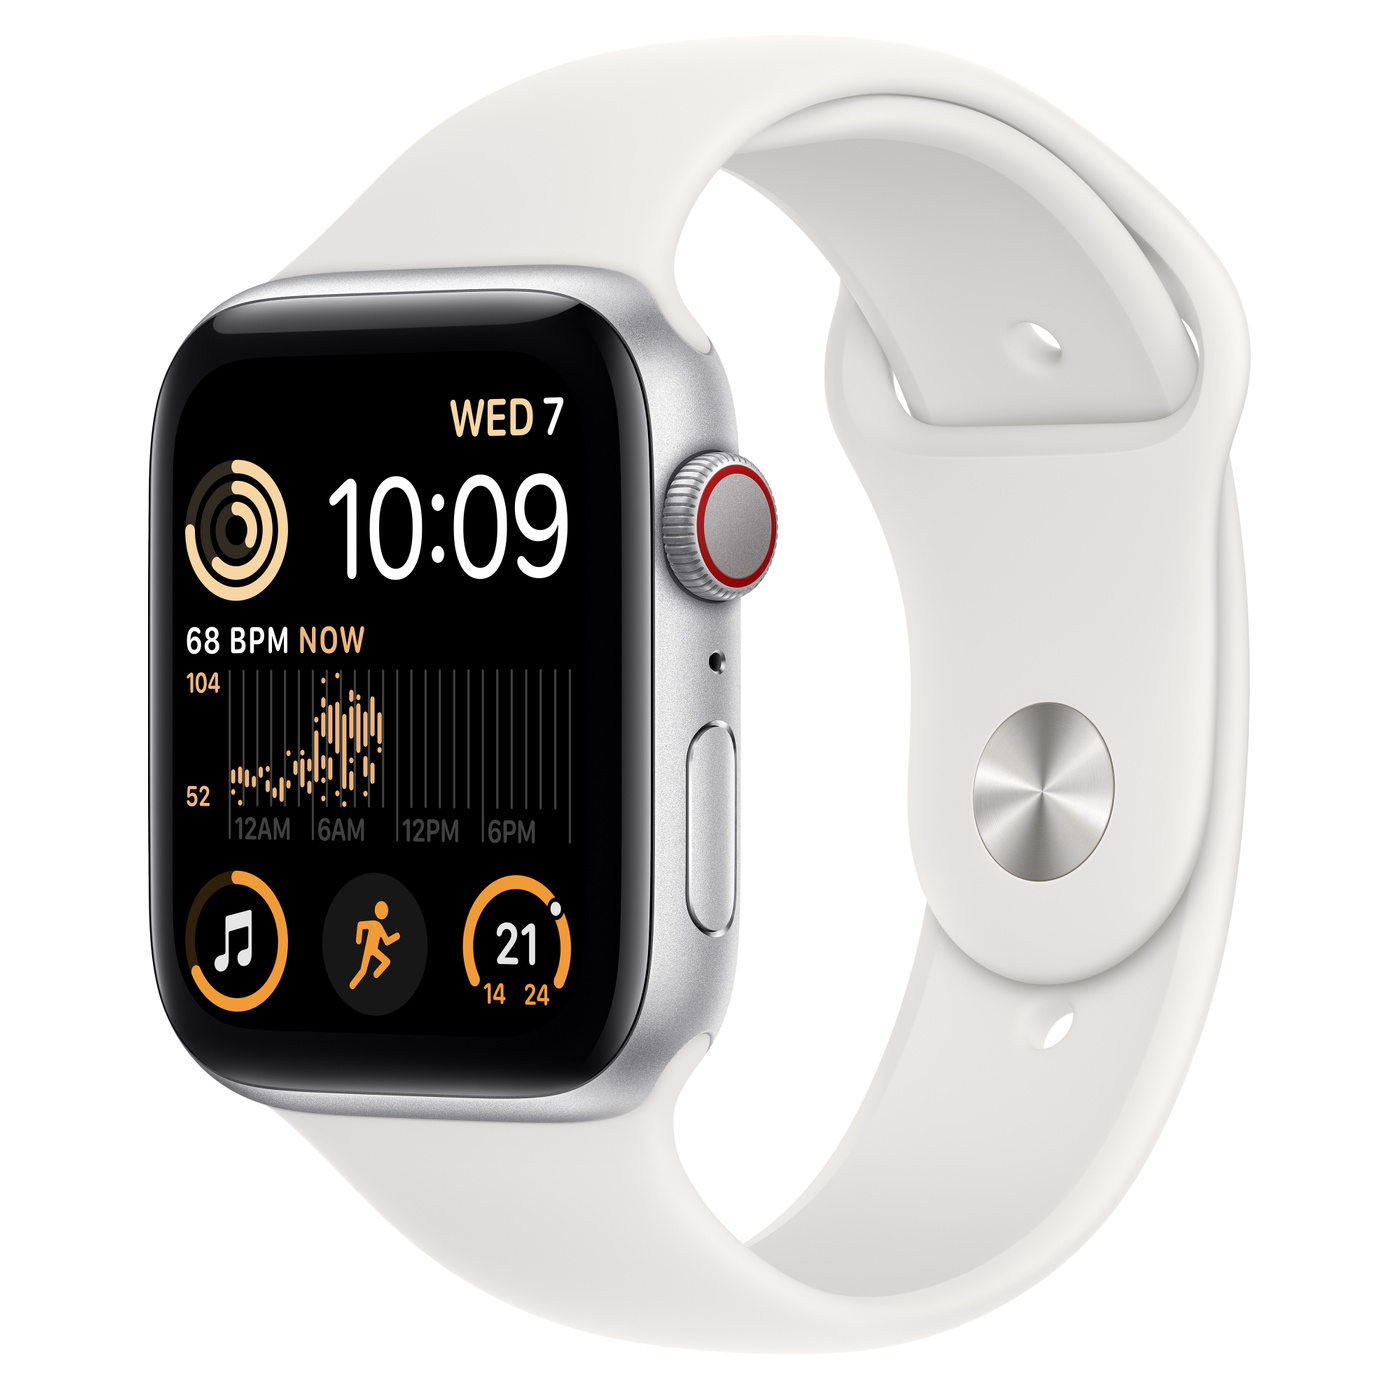 Apple Watch SE GPS + Cellular 44mm Silver Aluminium Case with White Sport Band - Regular